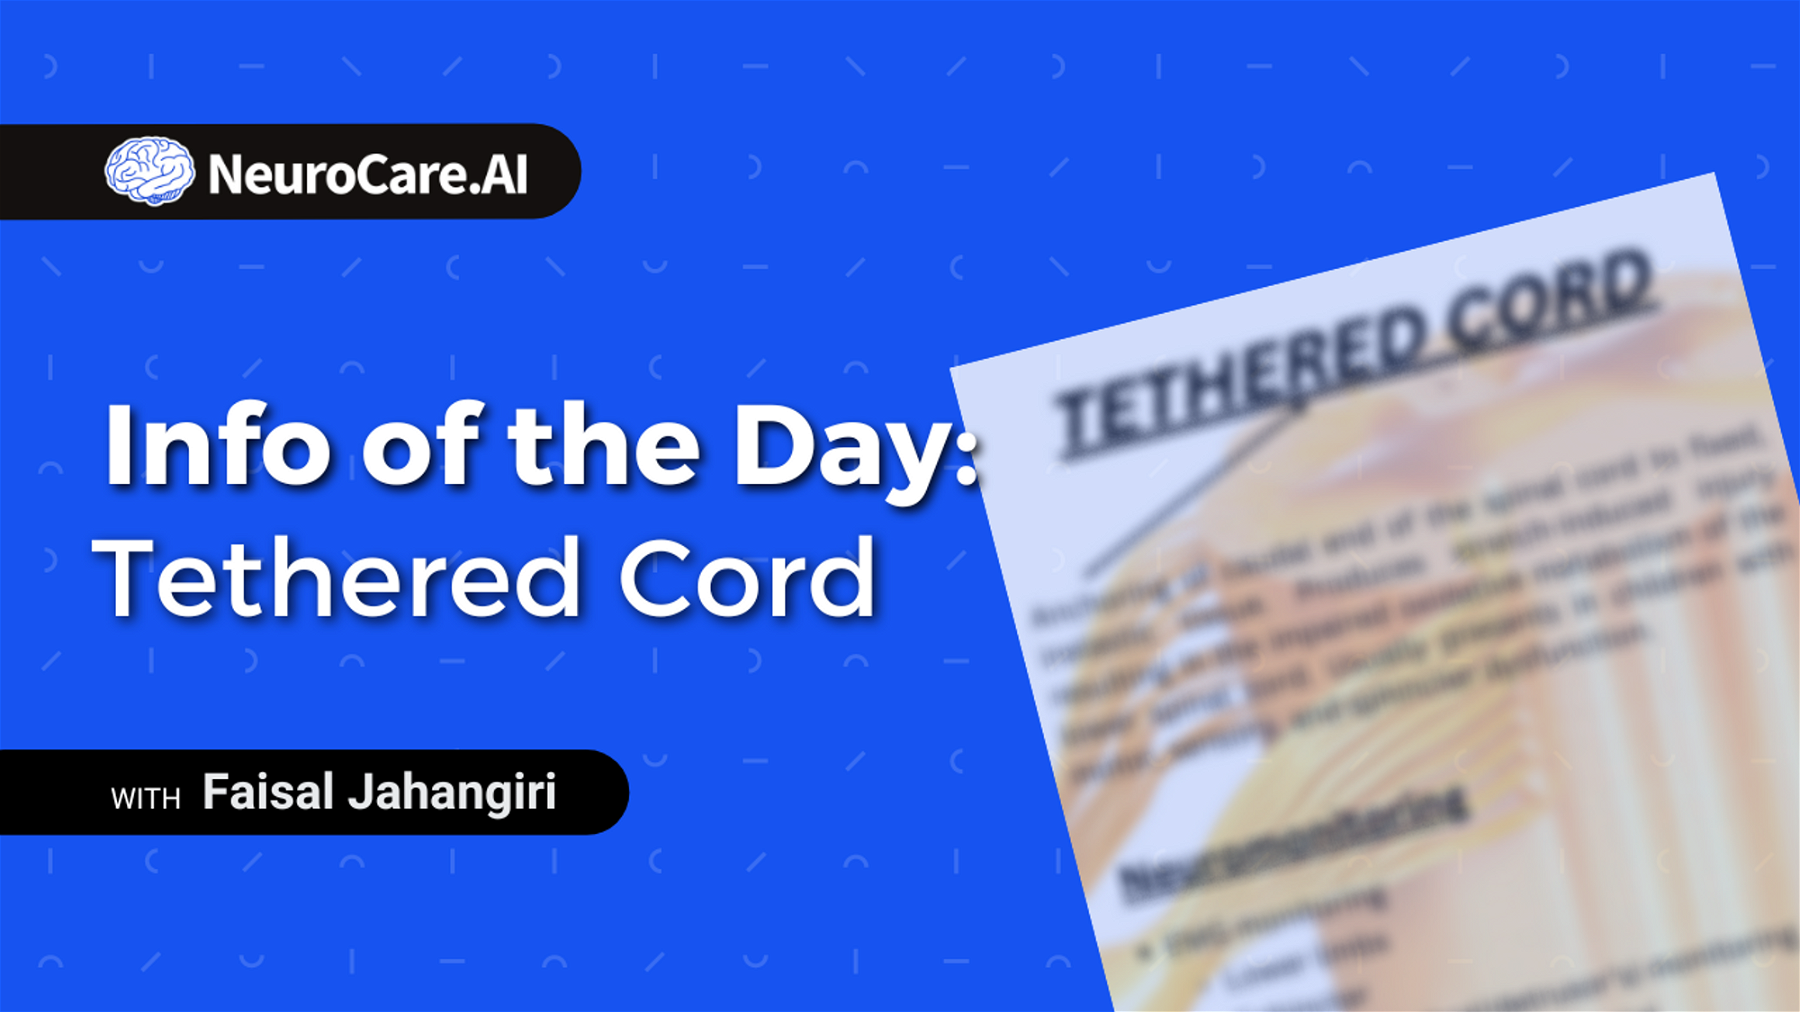 Info of the Day: "Tethered Cord"